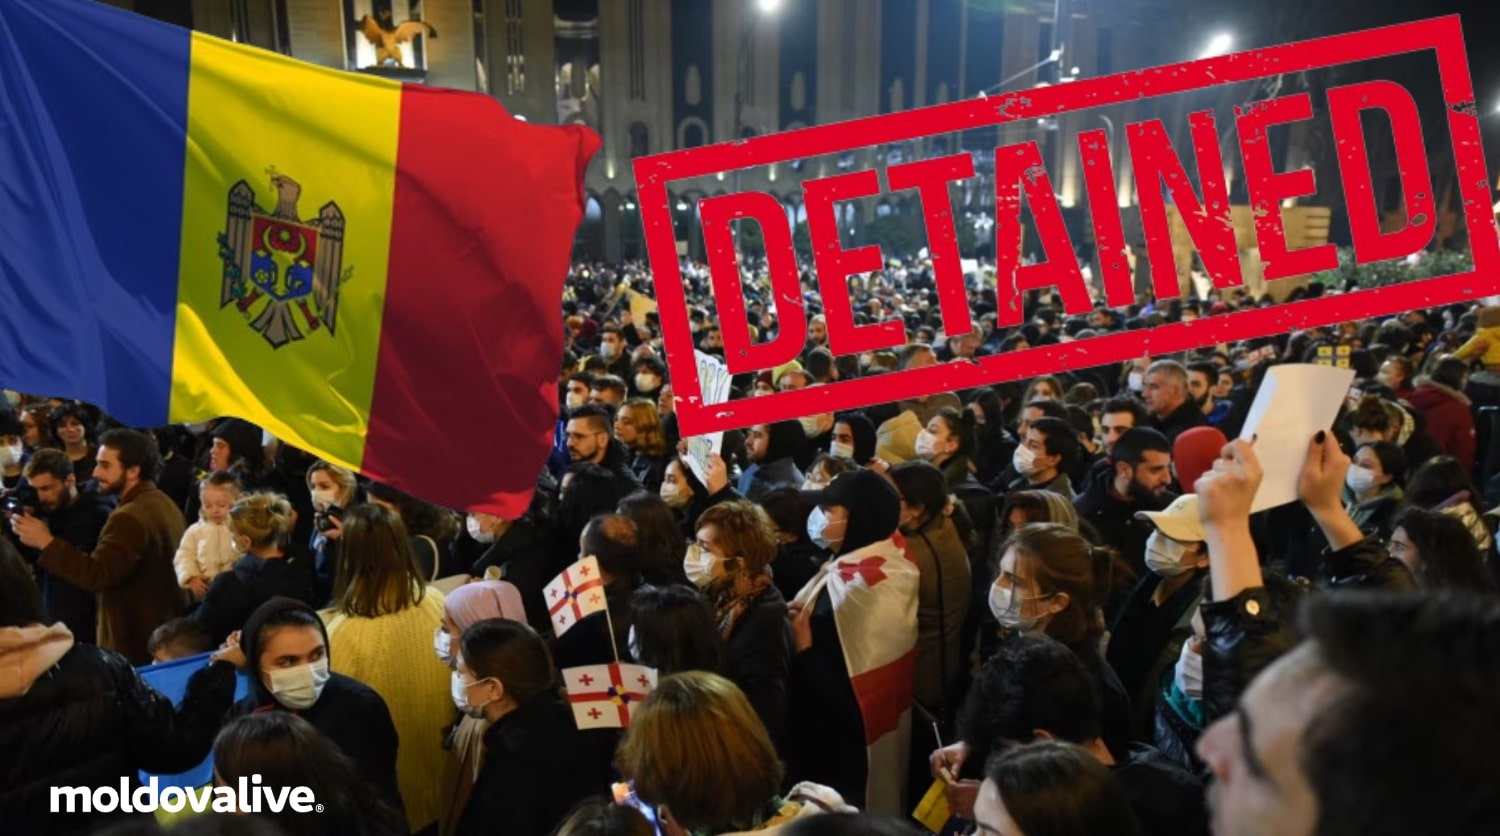 Moldovan Foreign Ministry confirms: Moldovan citizen detained at protest in Georgia